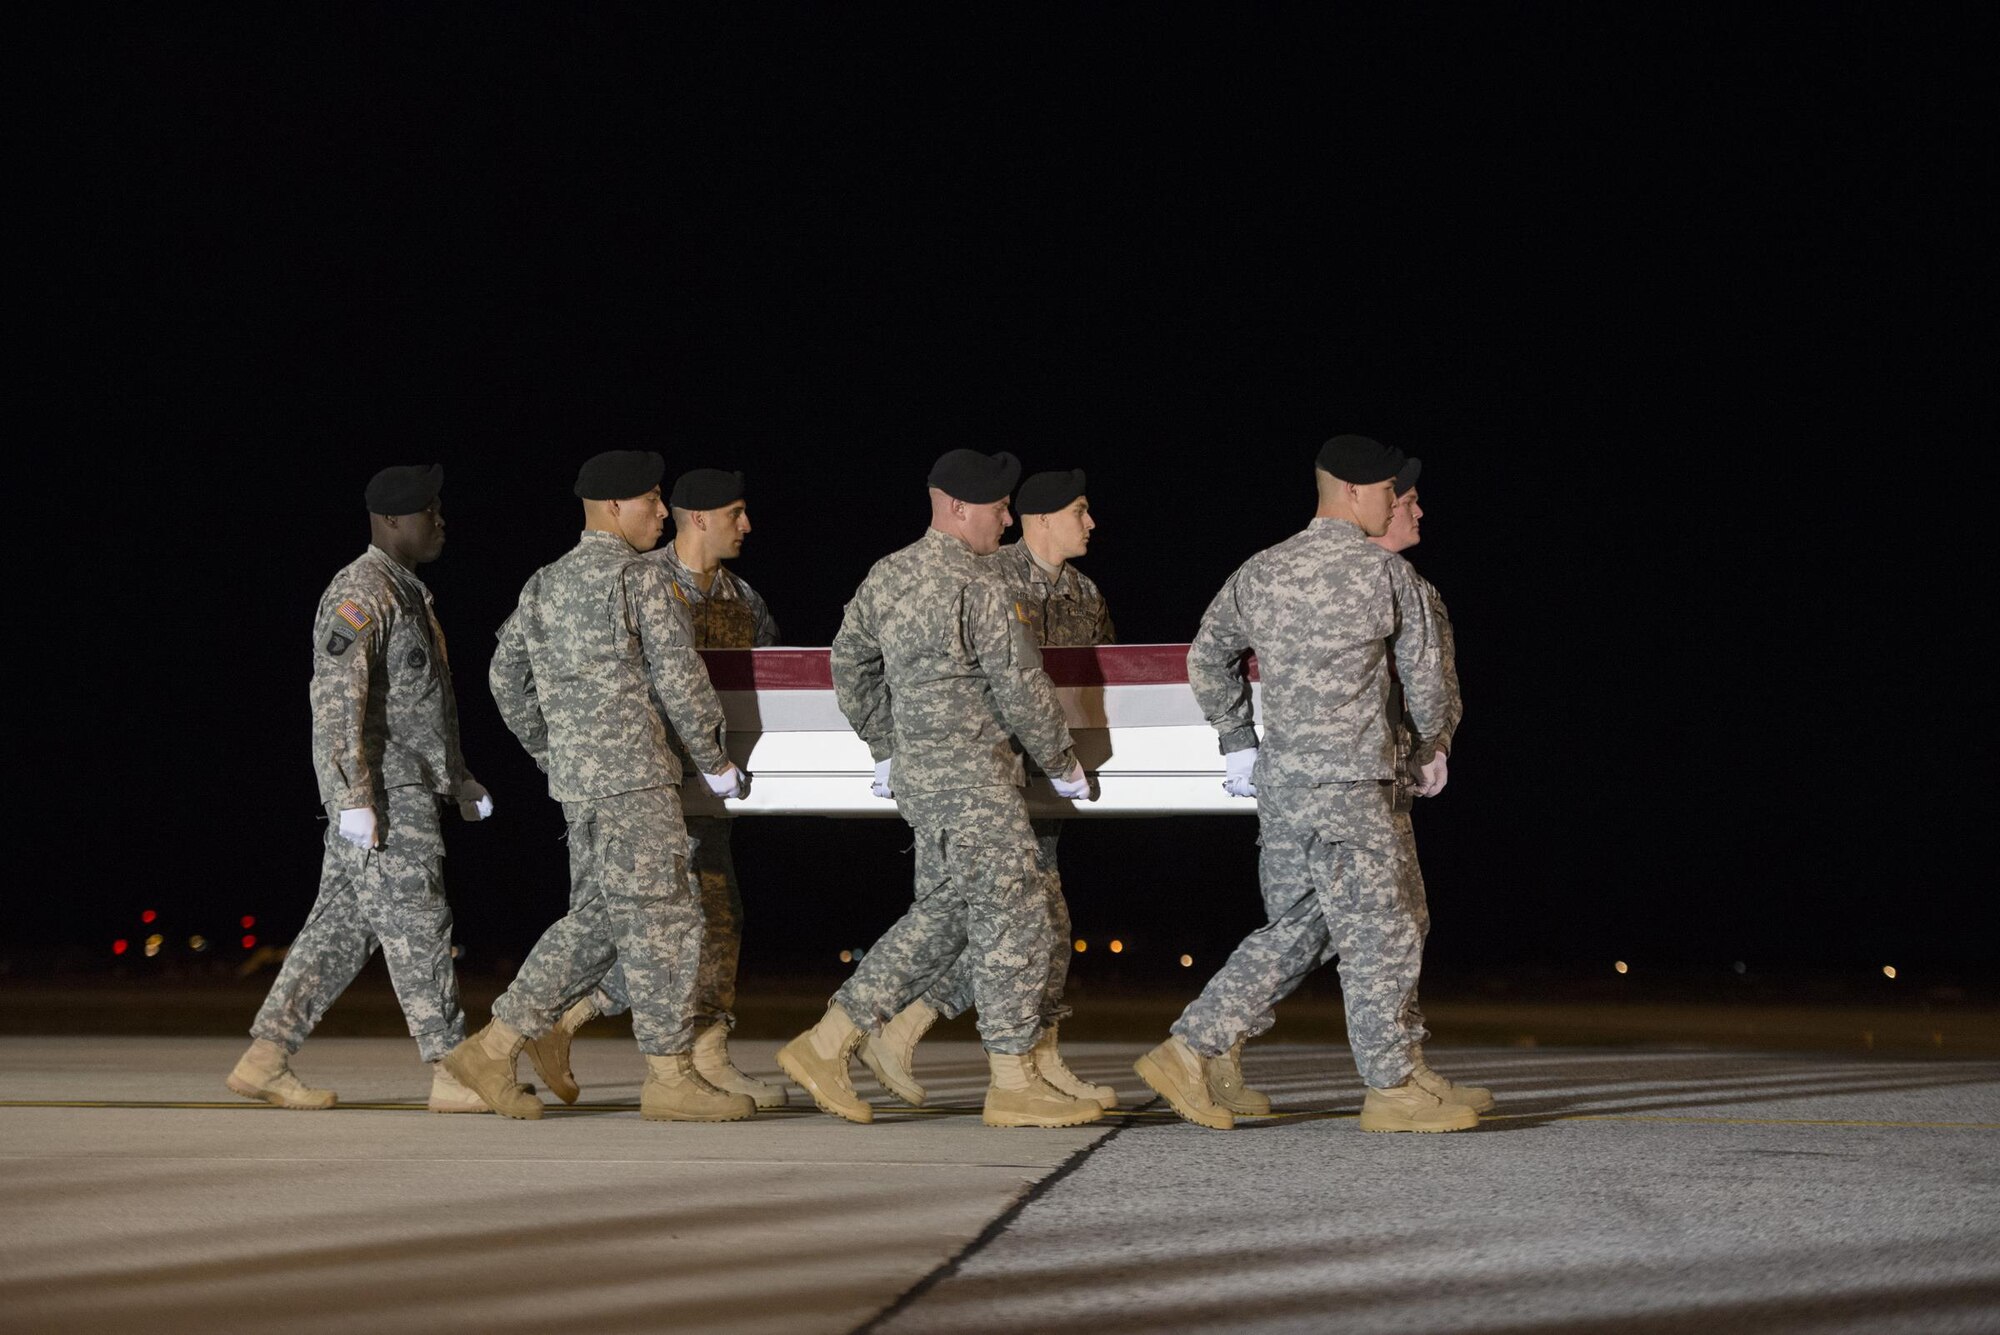 A U.S. Army carry team transfers the remains of U.S. Army Staff Sgt. Kevin J. McEnroe, 30, of Tucson, Ariz., Nov. 7, 2016, at Dover Air Force Base, Del. McEnroe was assigned to the 5th Special Forces Group (Airborne), Fort Campbell, Ky. (U.S. Air Force Photo by Senior Airman Aaron J. Jenne)